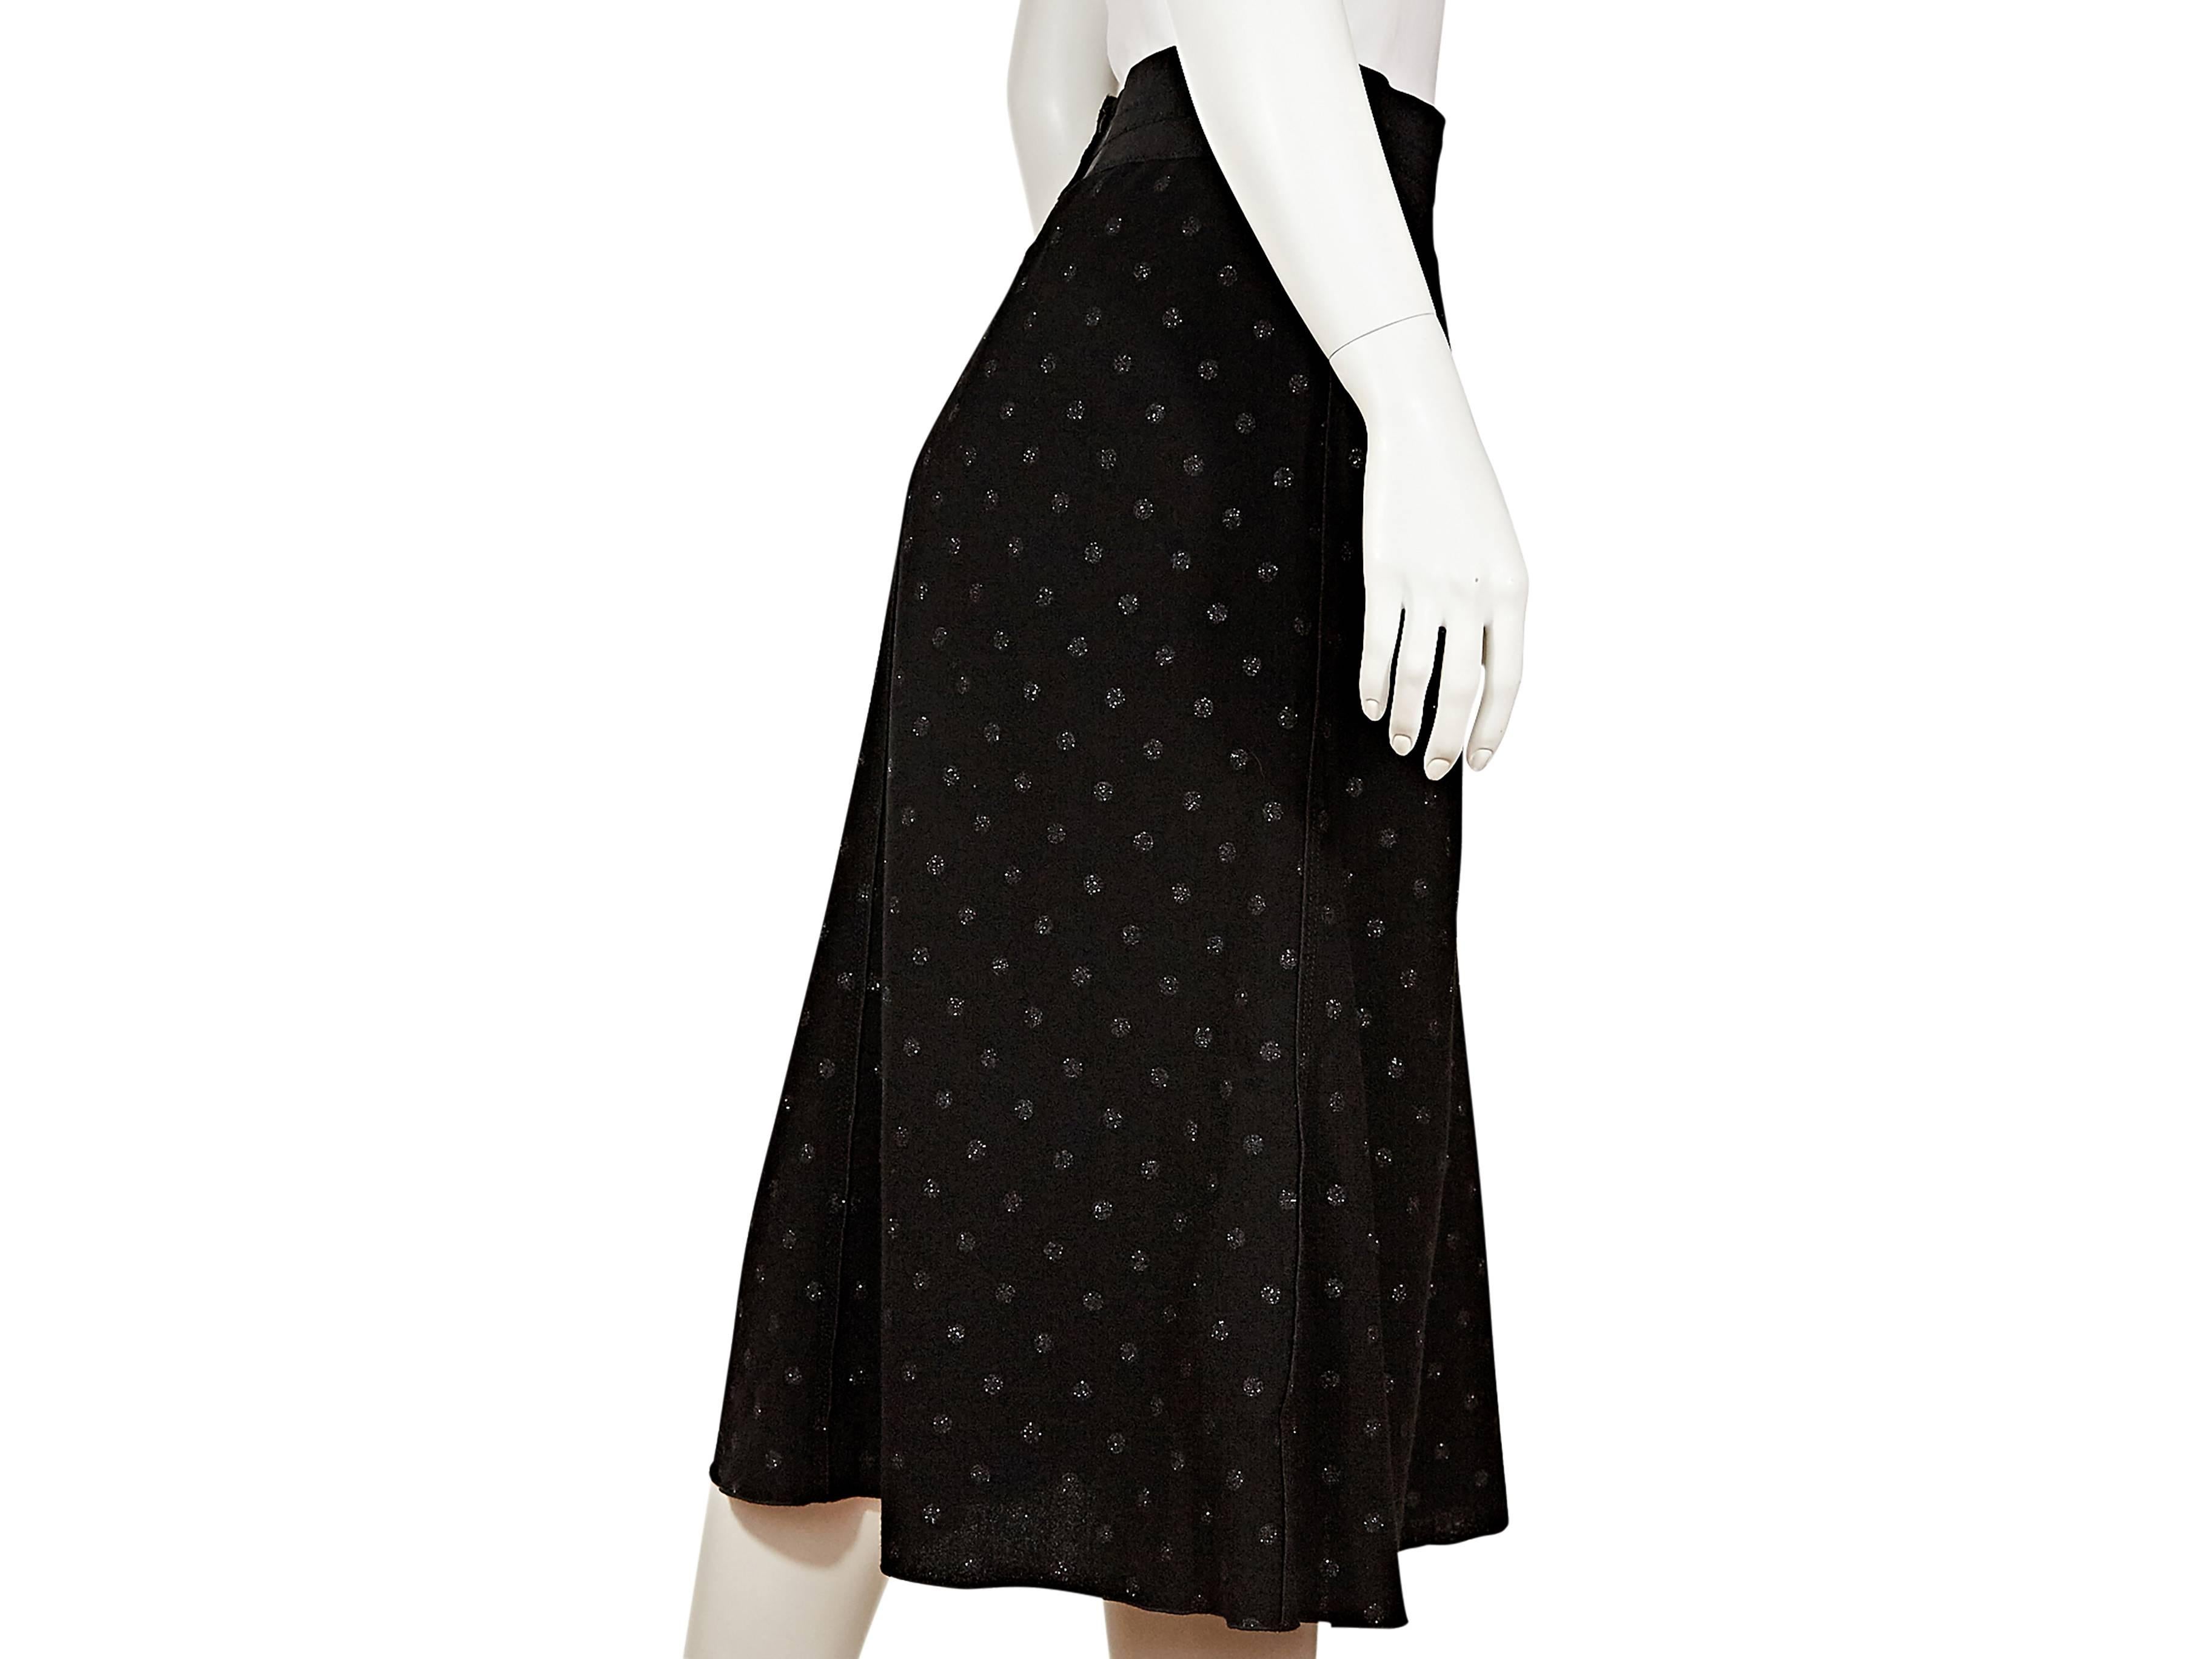 Black wool skirt embellished with polka dots by Marc Jacobs.  Wide banded waist.  Concealed back zip closure.  
